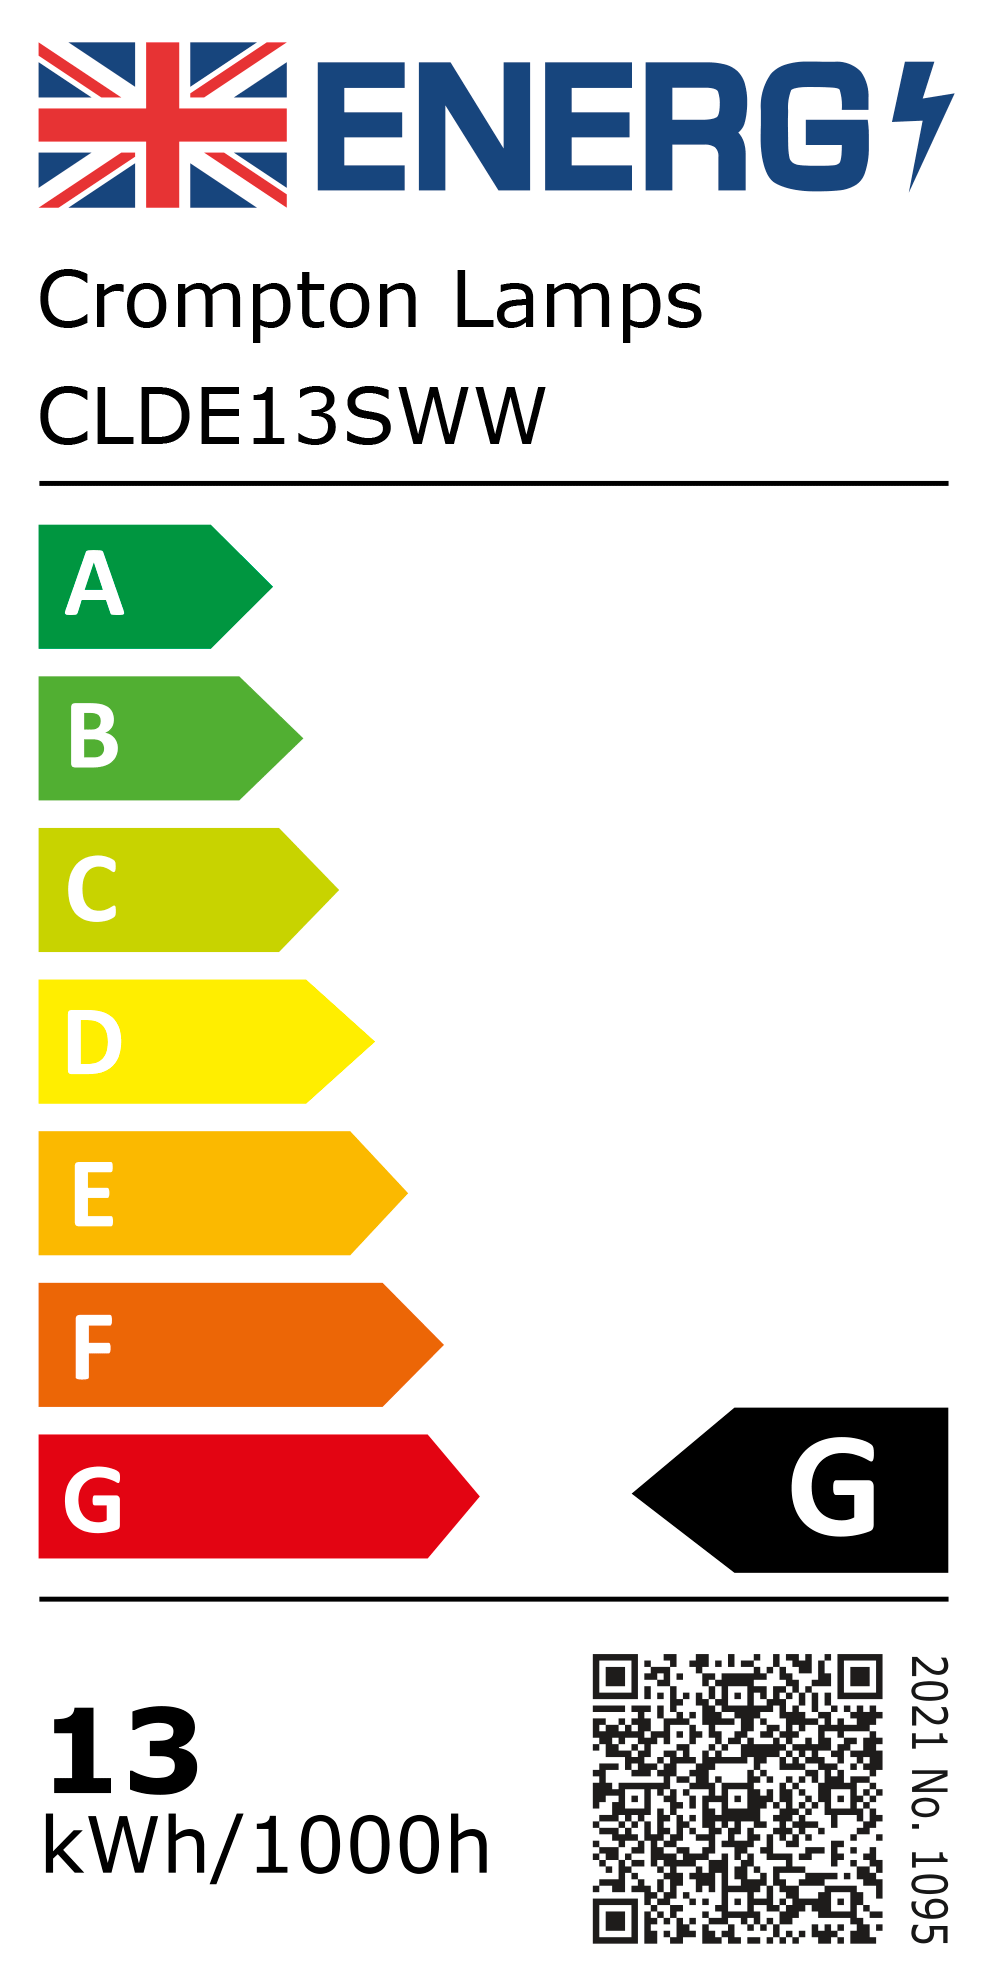 New 2021 Energy Rating Label: Stock Code CLDE13SWW